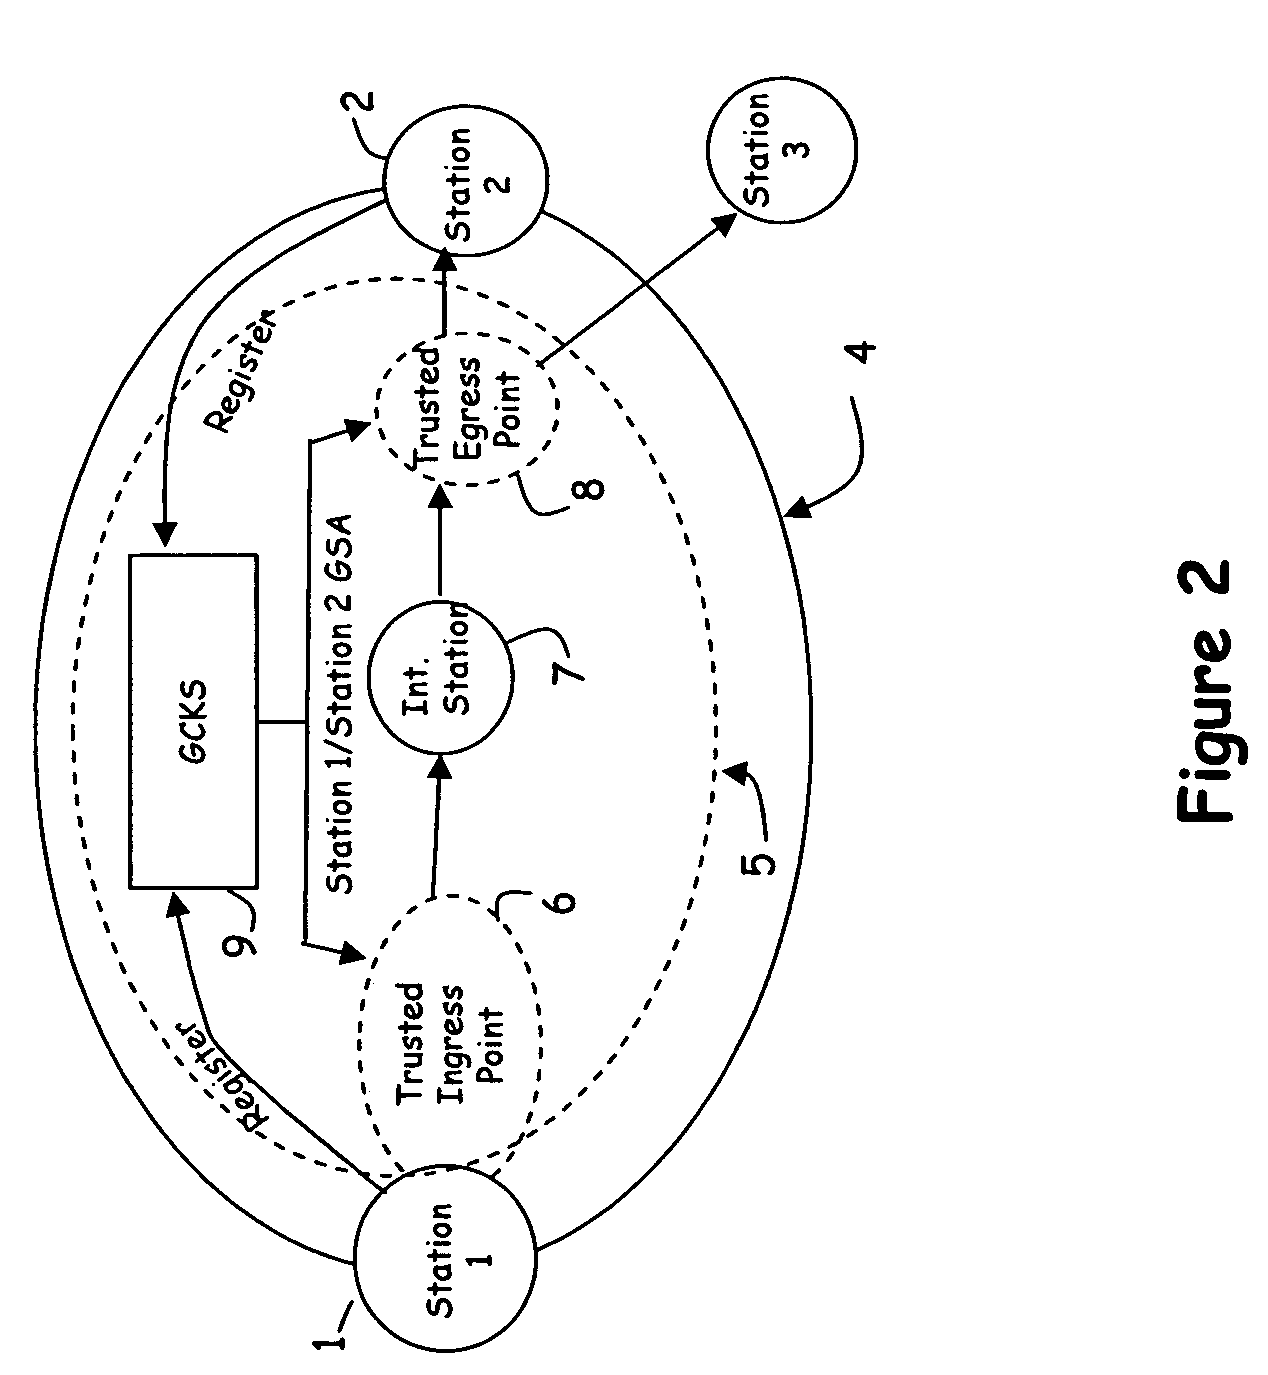 Scalable method and apparatus for transforming packets to enable secure communication between two stations